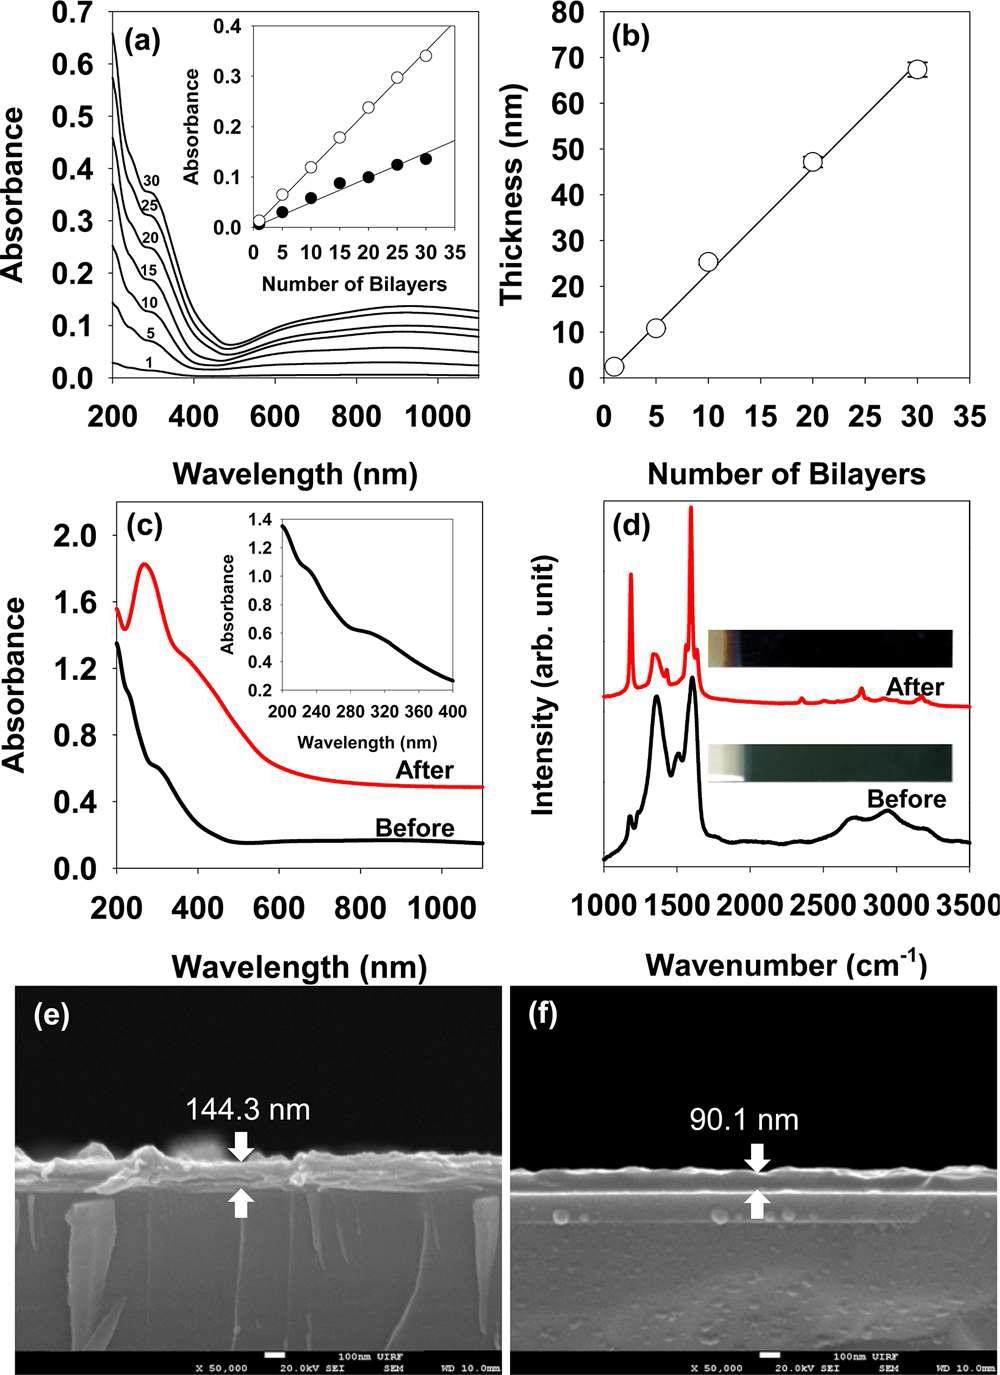 (a) UV/visible absorbance spectra of (PANi/GO)n with increasing number (n) of bilayers dip-coated onto a fused silica pre-coated with (PPV-pre/GO)30 films. Note that the absorbance of (PPV-pre/GO)30 has been subtracted from the spectra of (PANi/GO)n/(PPV/GO)30. The inset shows the absorbance at 310 nm (○) and 880 nm (●) as a function of the number of bilayers (n = 1 to 30). (b) Ellipsometric thickness of (PANi/GO)n films on a silicon substrate. (c) UV/visible absorbance spectra and (d) Raman spectra (λex = 532 nm, 6 mW) of (PANi/GO)30/(PPV-pre/GO)30 before (▬) and after (▬) HI/H2O vapor treatment at 100 oC for 5h. The inset in (c) shows the magnified absorbance spectra of films before treatment. The insets in (d) show the digital images of multilayer film. FESEM images of (PANi/GO)30/(PPV-pre/GO)30 (e) before and (f) after HI/H2O vapor treatment at 100 oC for 5h.